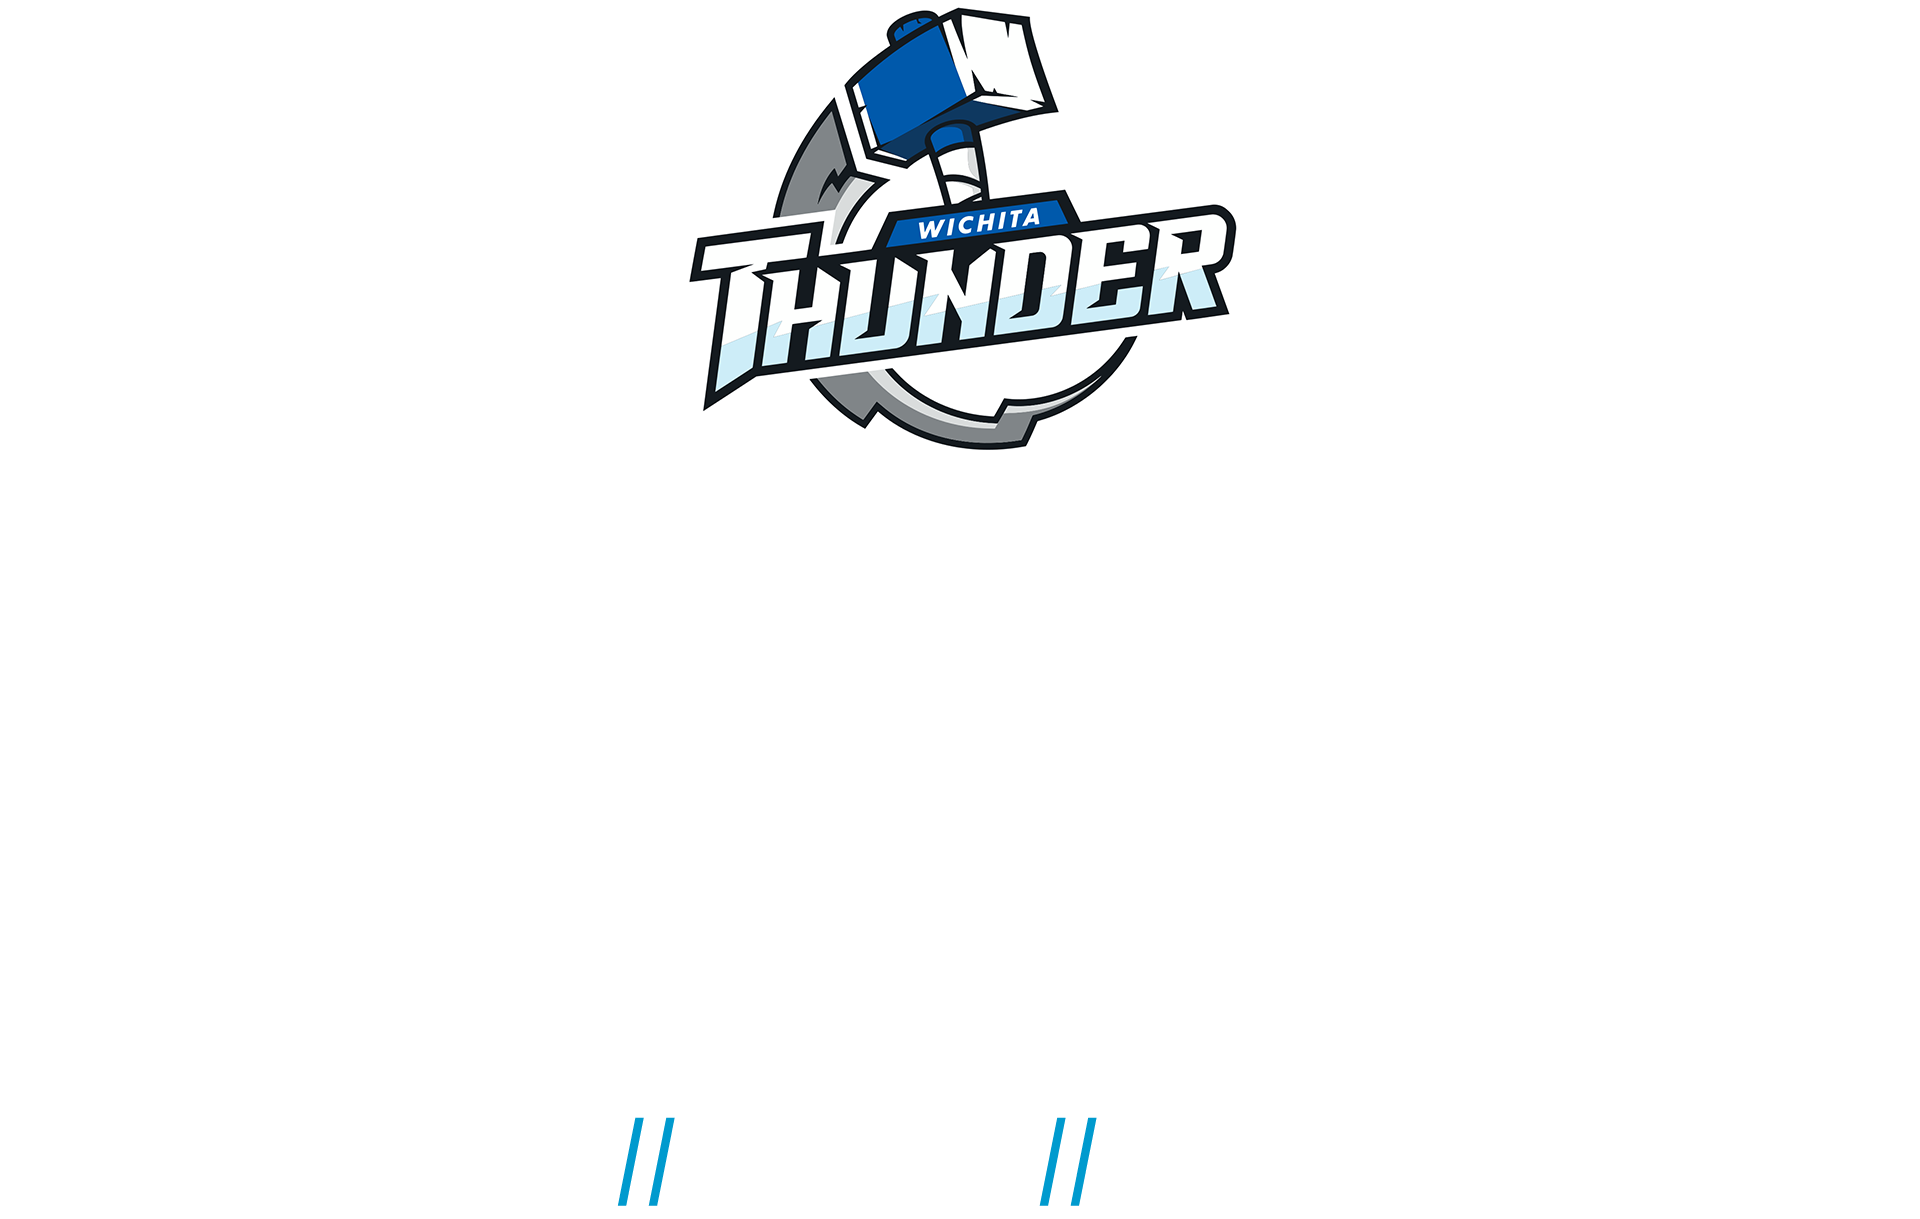 Wichita Thunder Faith & Family Night with Postgame Featuring Comedian Michael Jr. // Sunday, Feb. 6 // Intrust Bank Arena